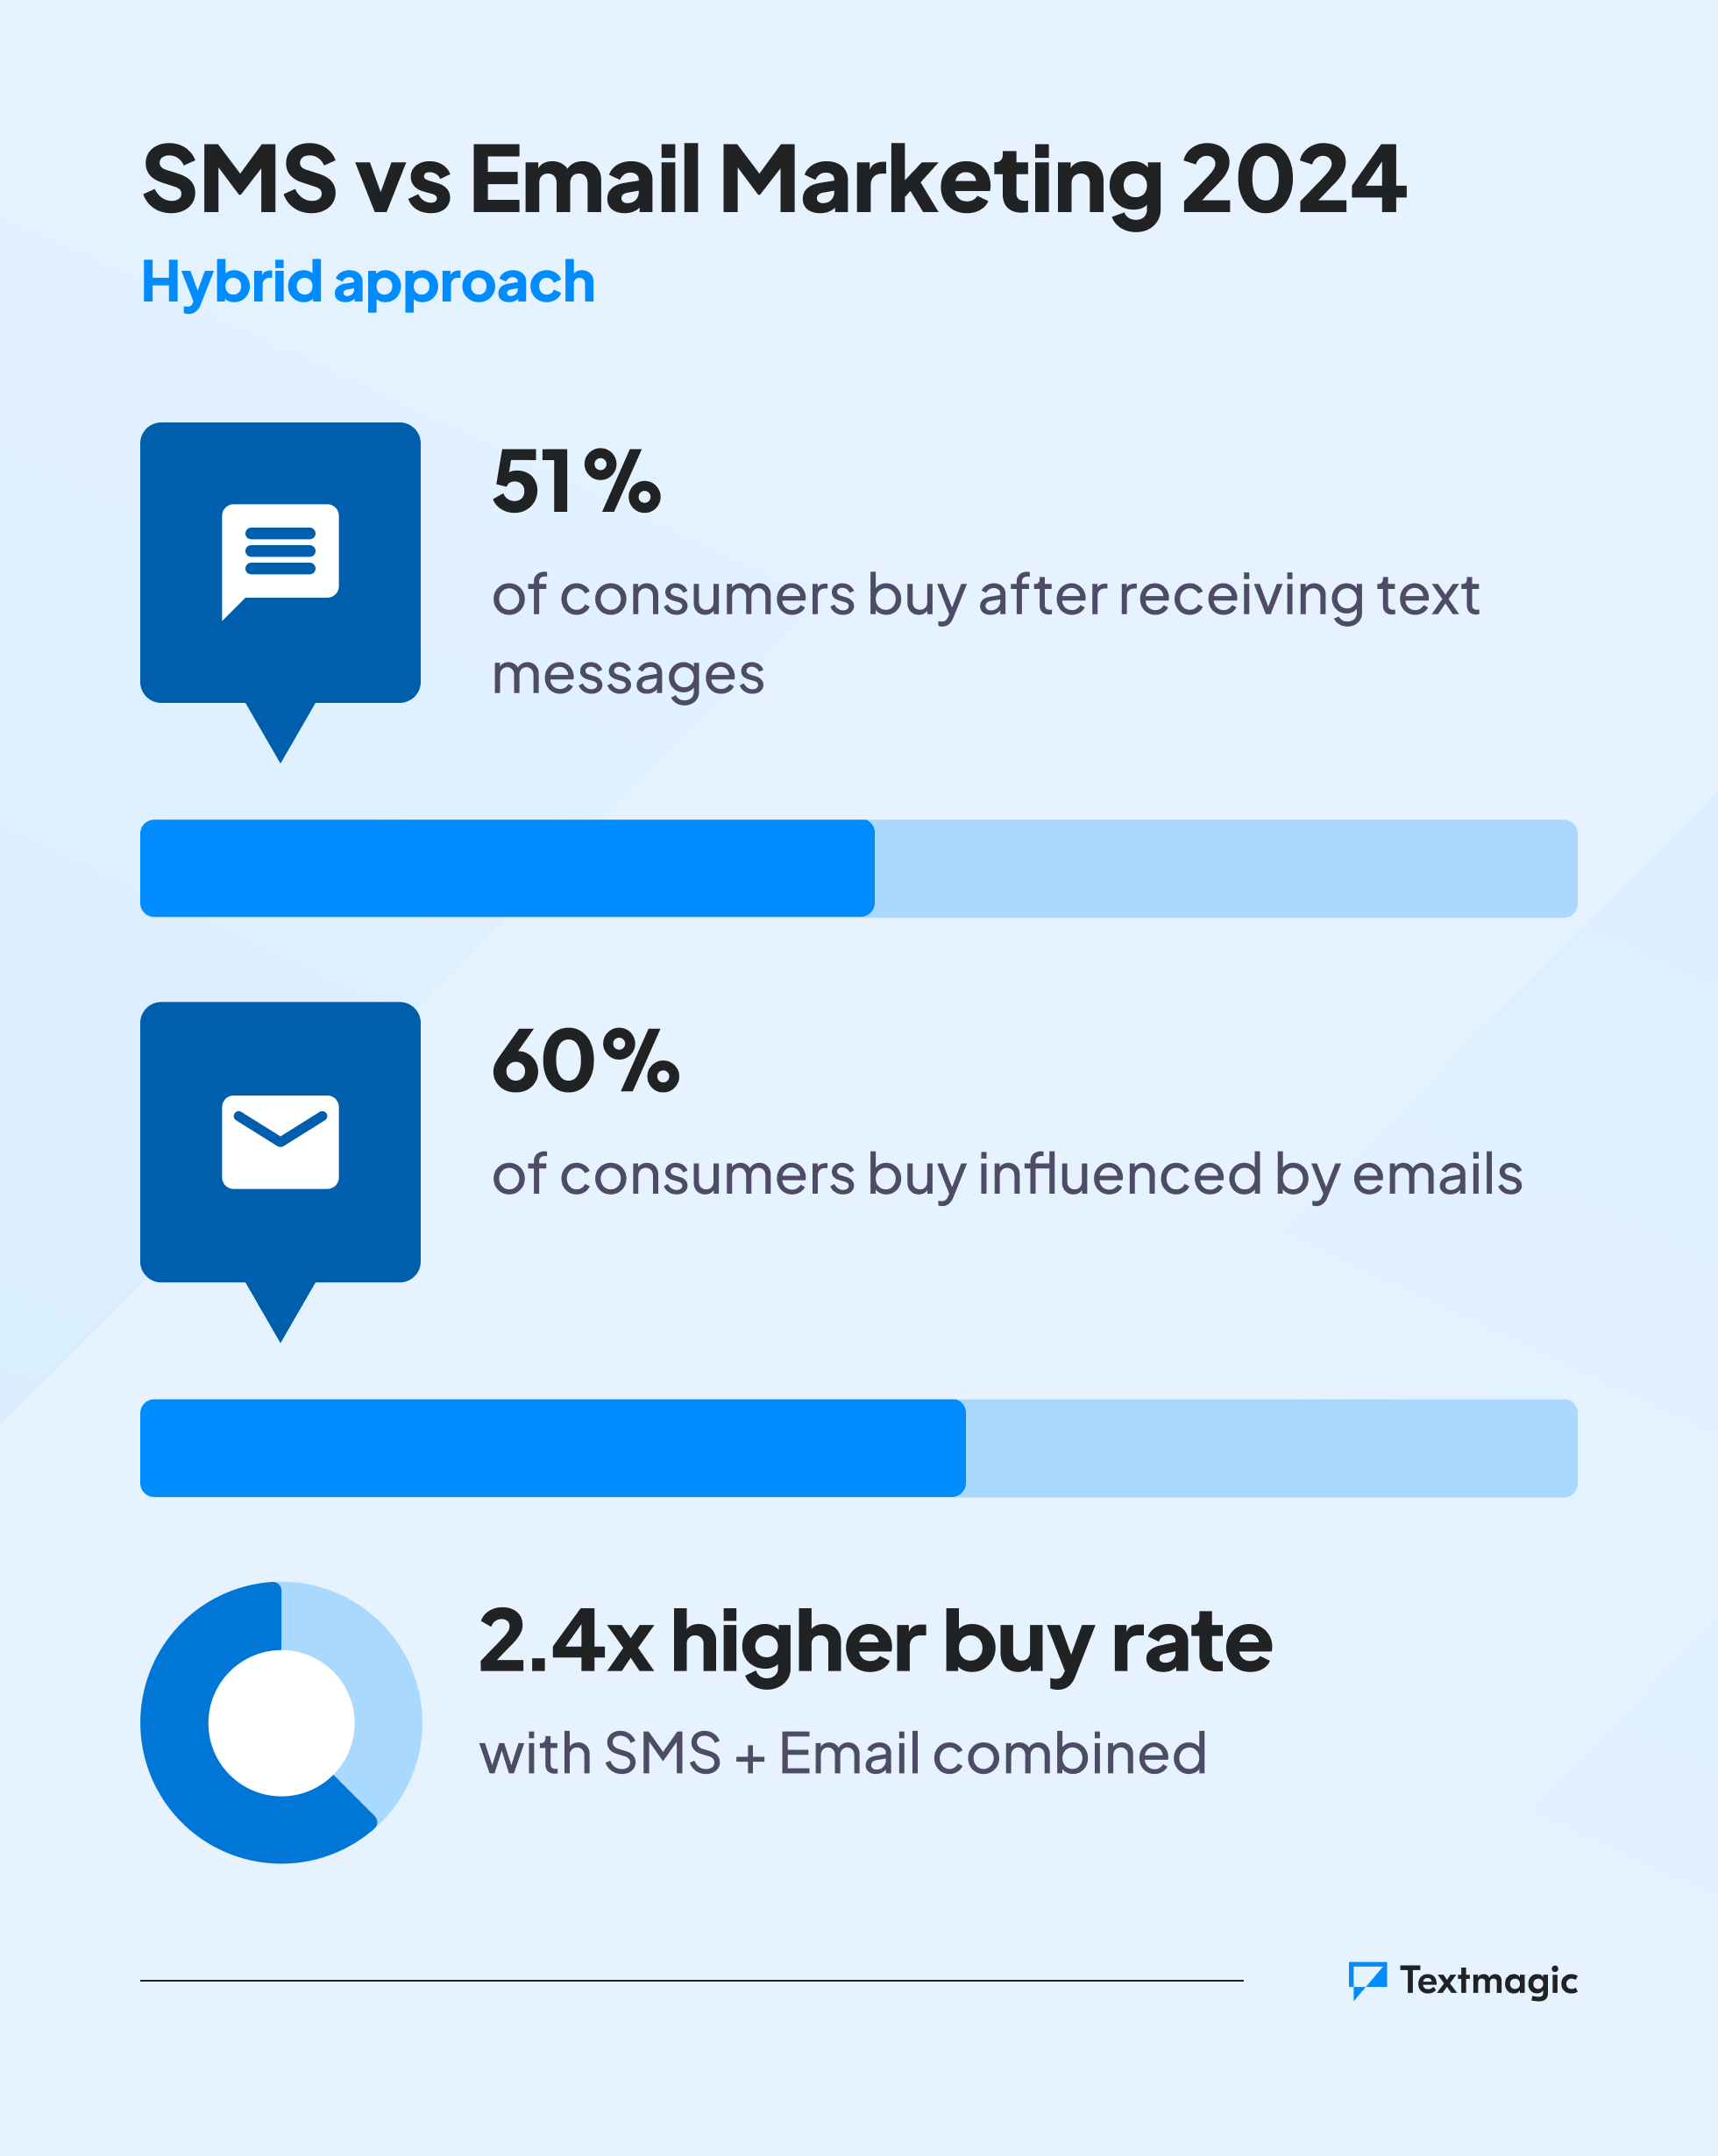 image depicting a 2024 hybrid approach of SMS vs email marketing